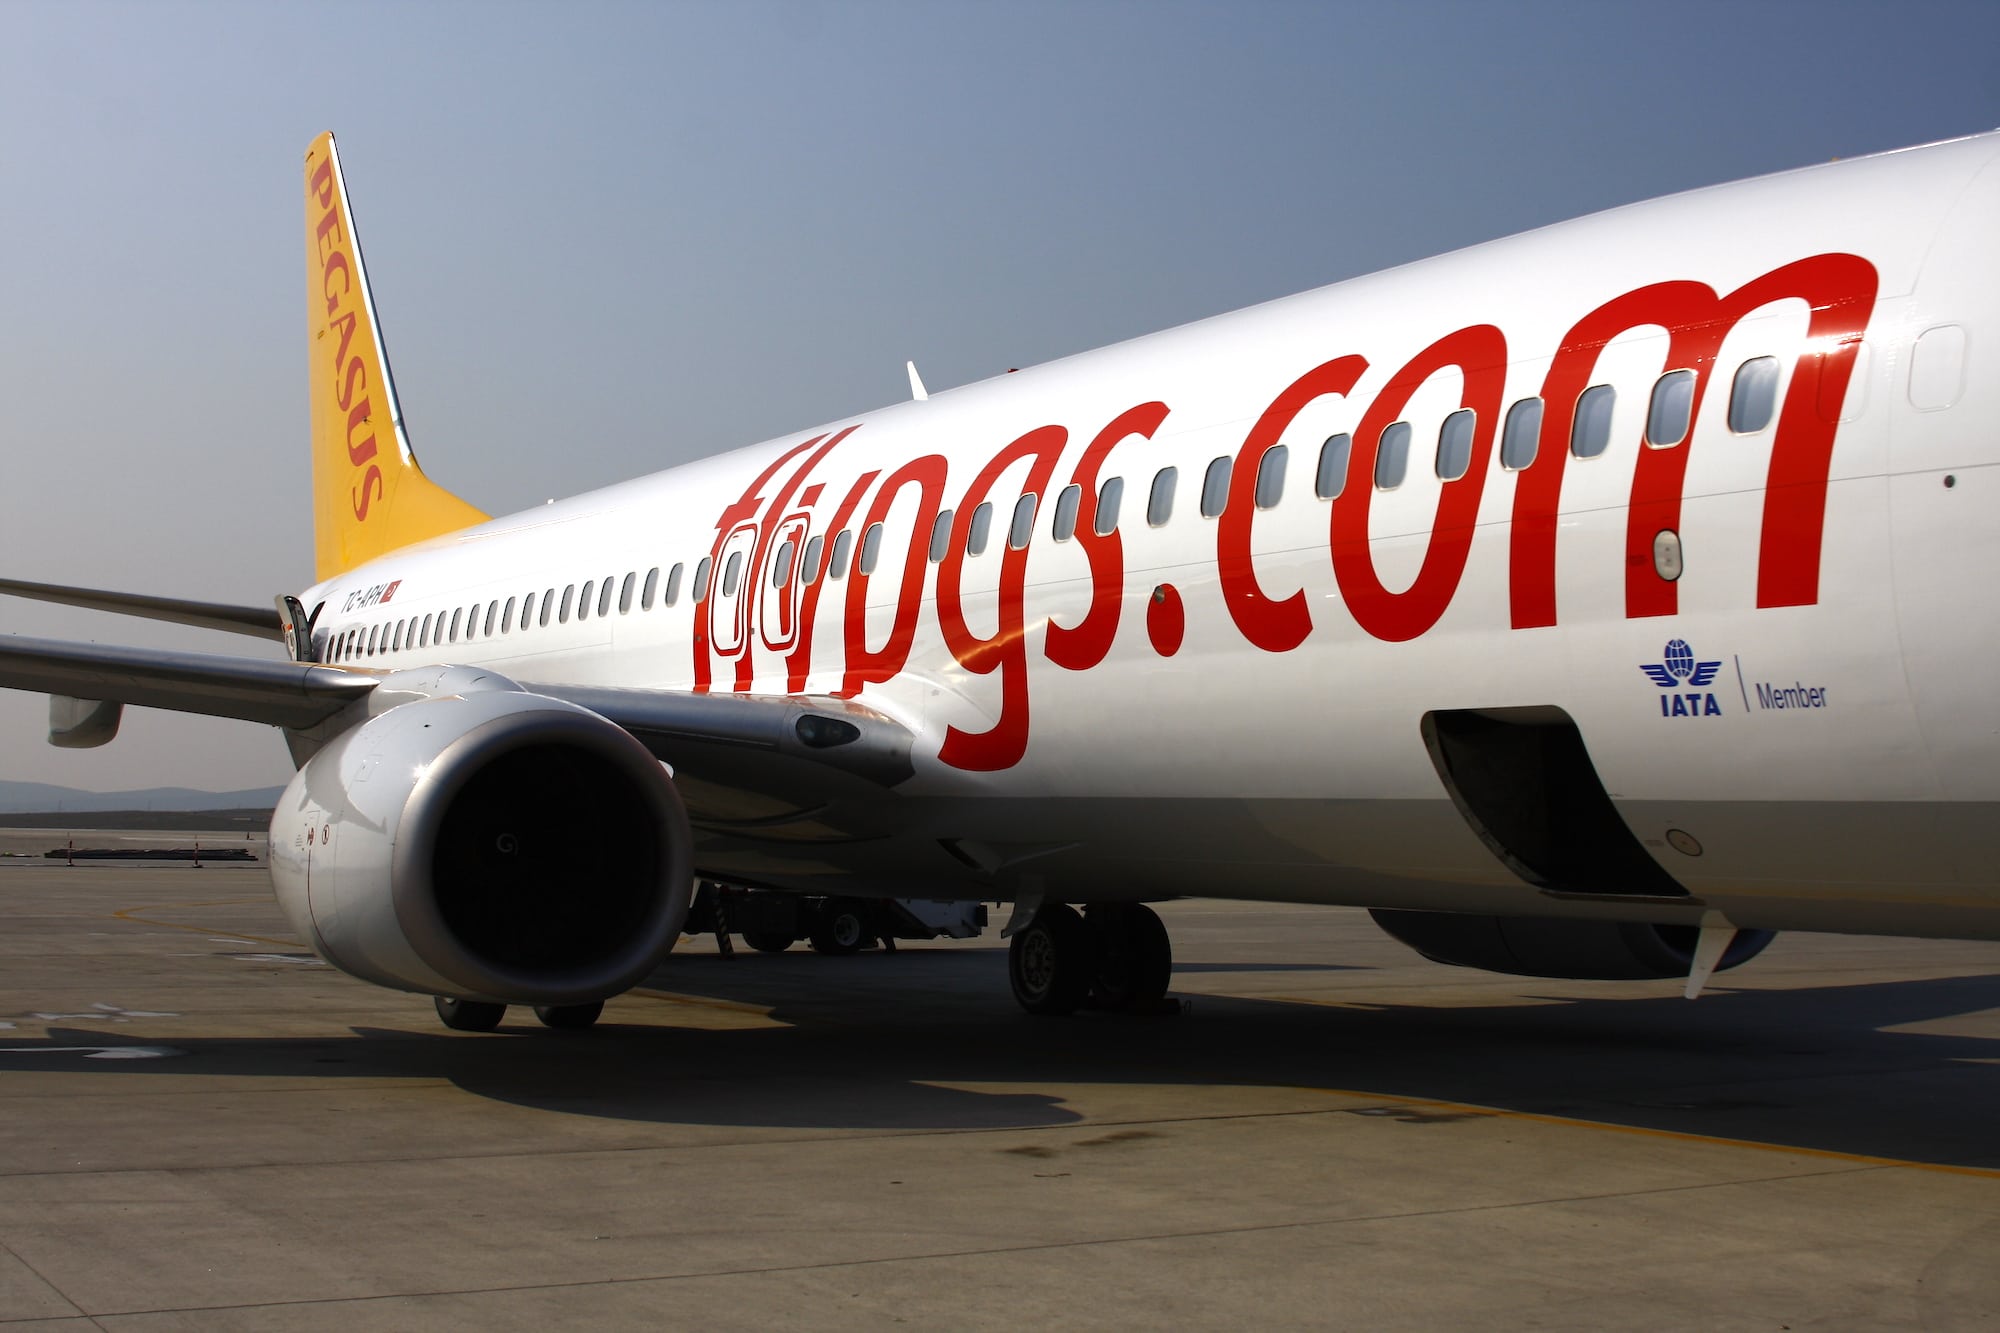 Pegasus Airlines has decided that consumers don't like unbundled fares. So it came up with something better.